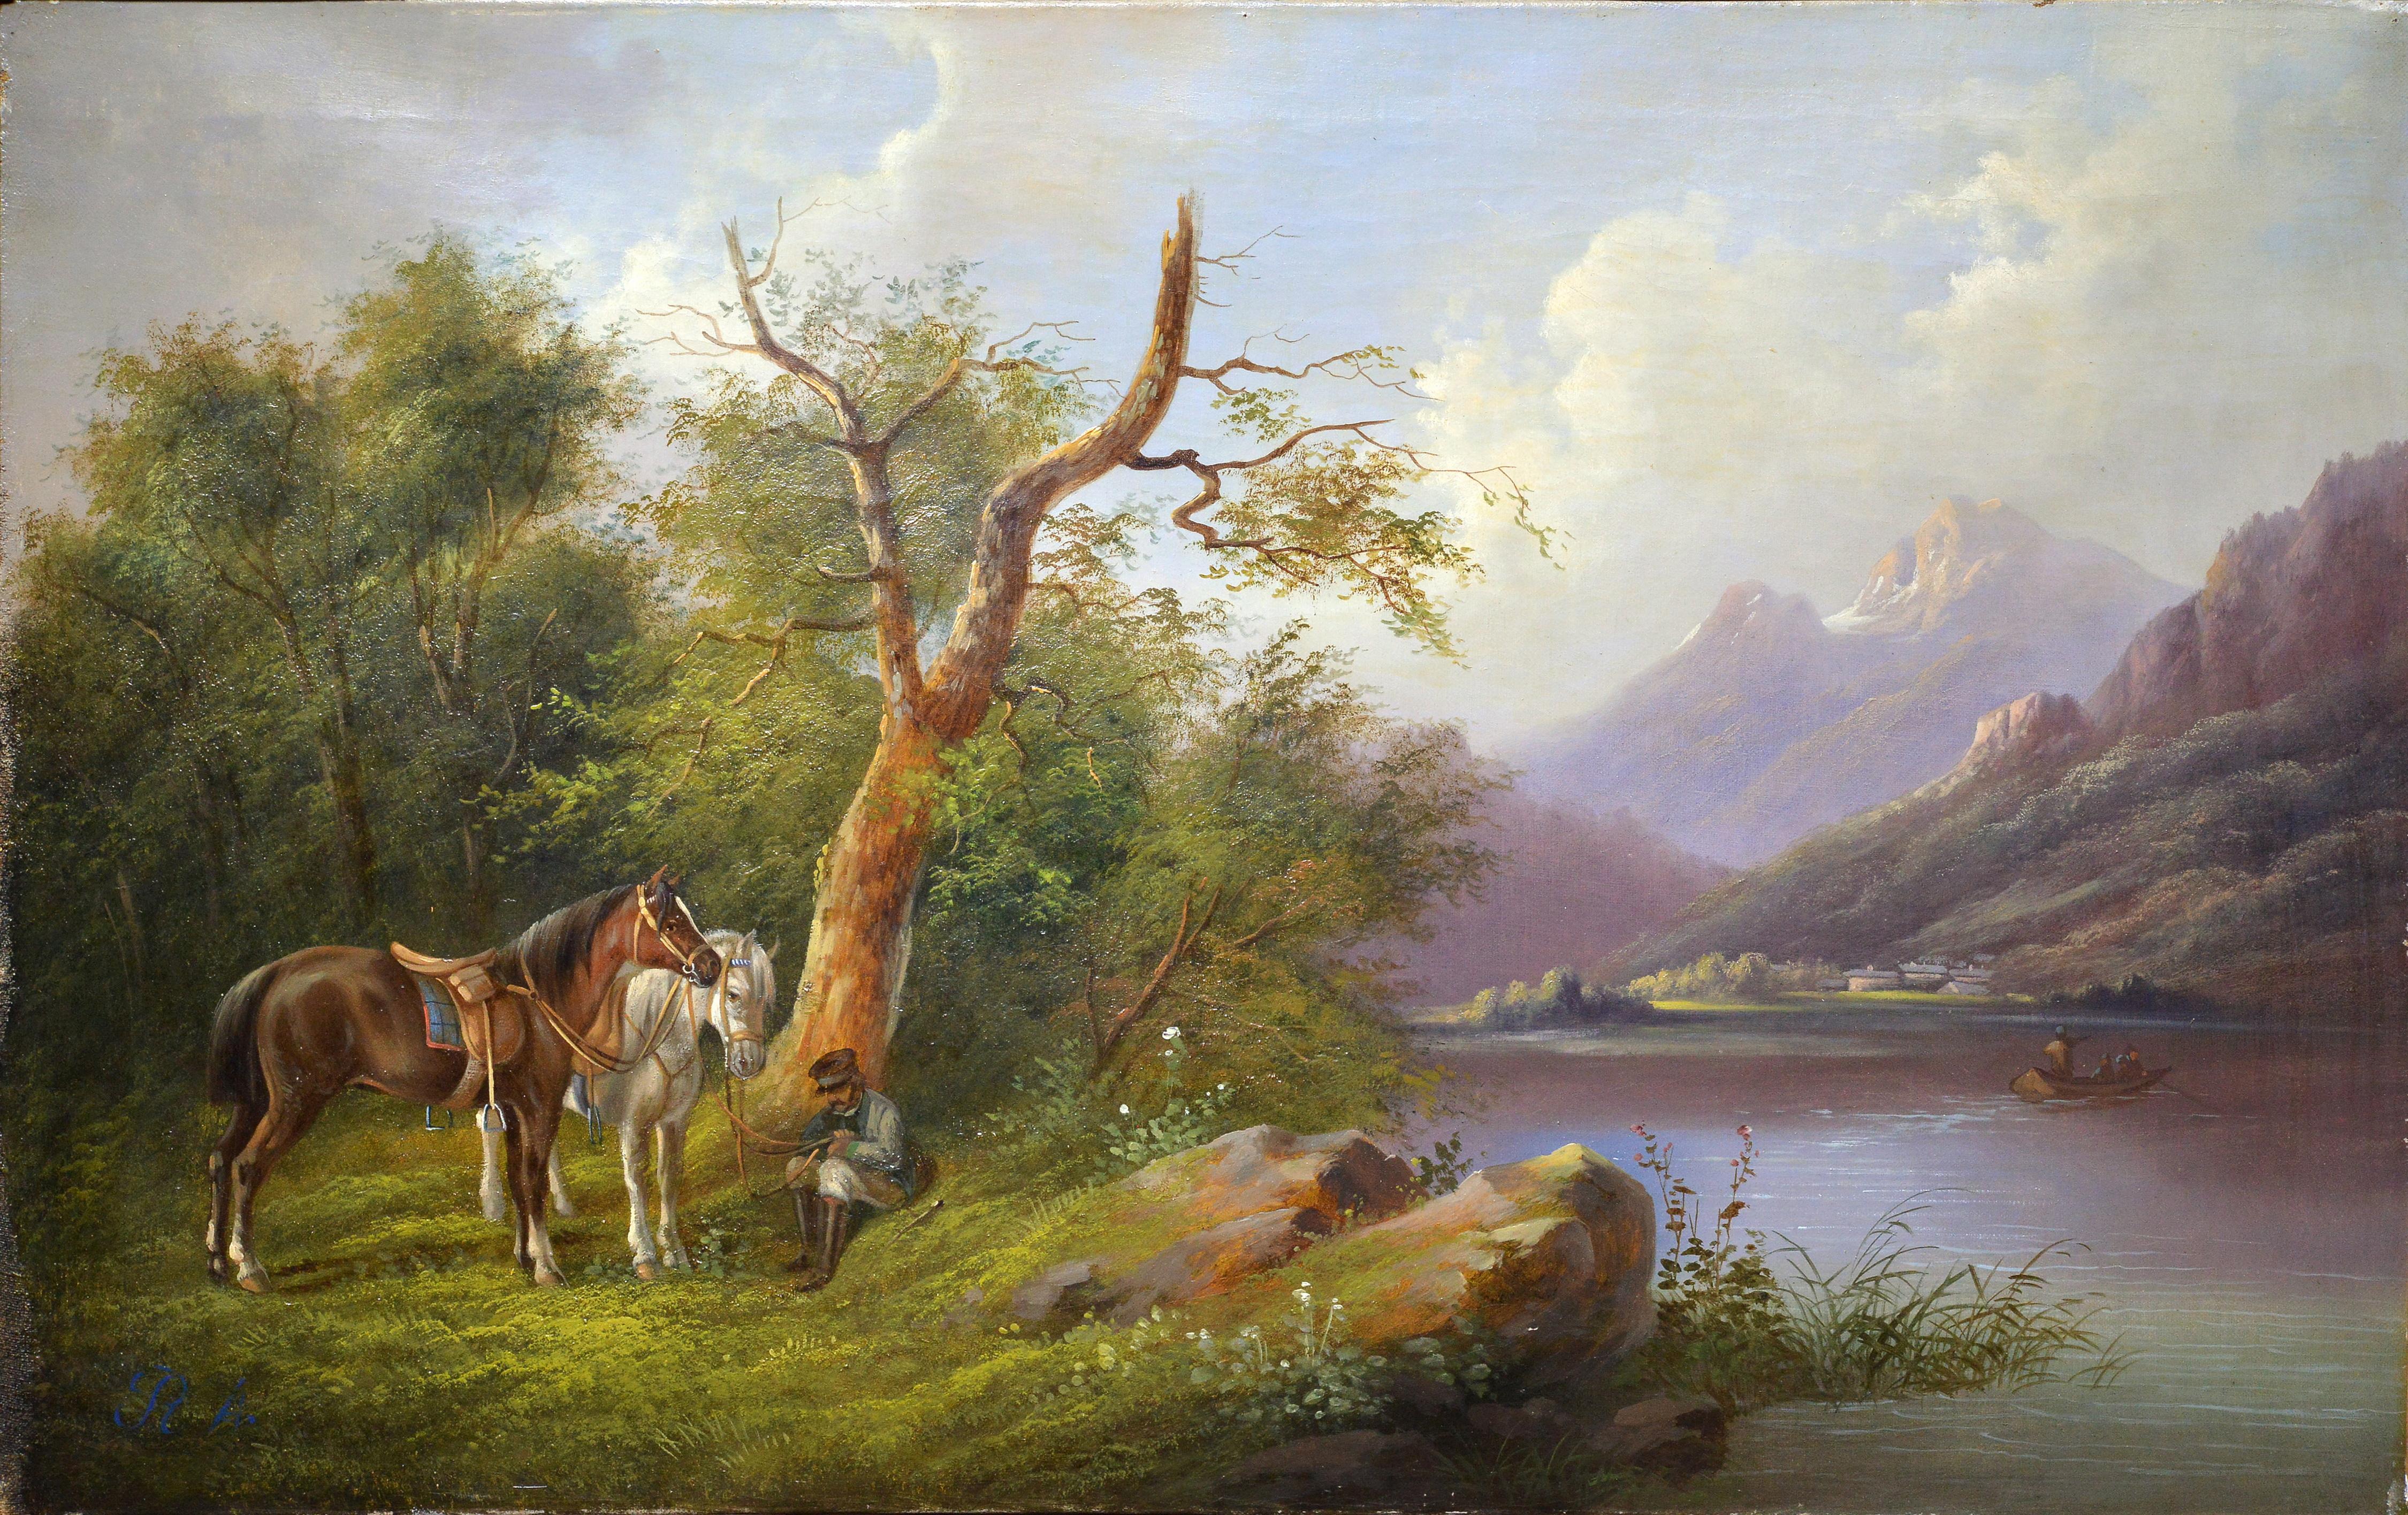 Alpine landscape Horseman halt at mountain lake 19th century Oil painting Signed - Realist Painting by Unknown